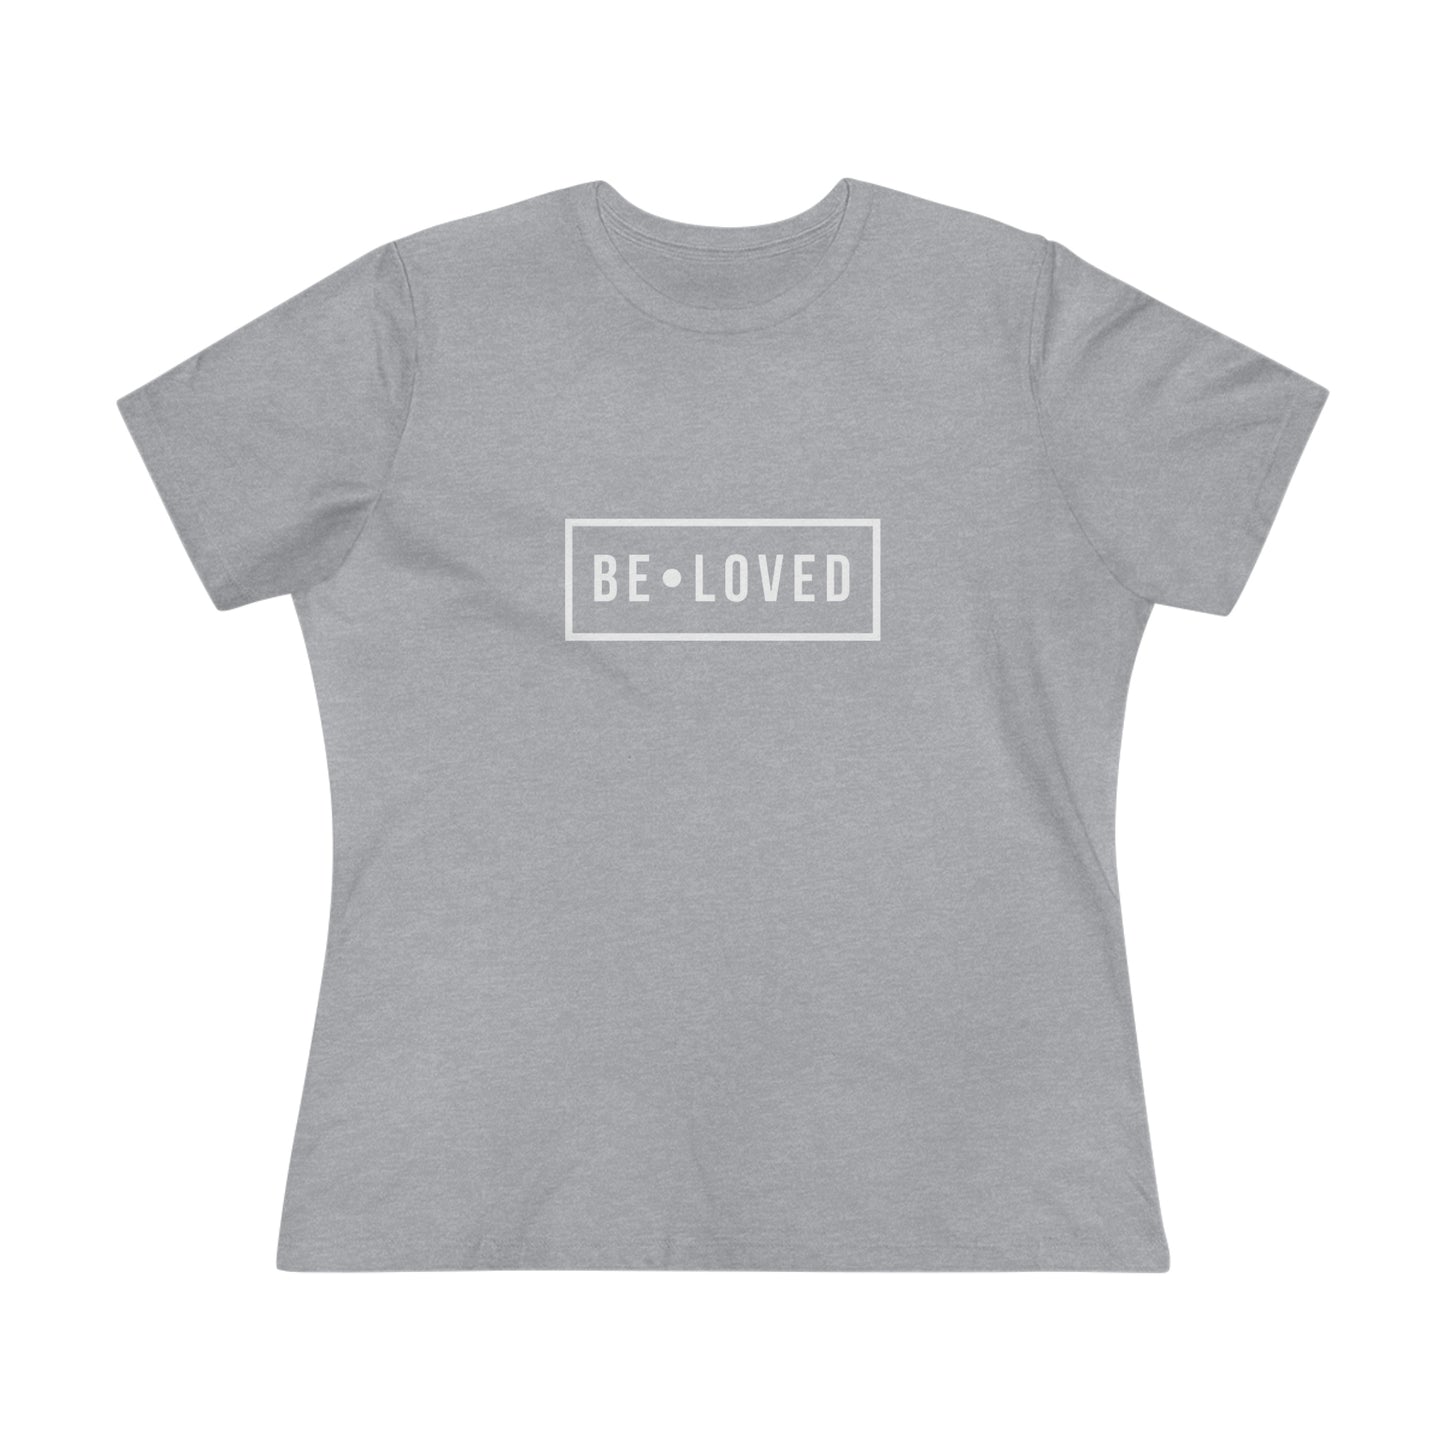 BE•LOVED Women's Cotton Tee